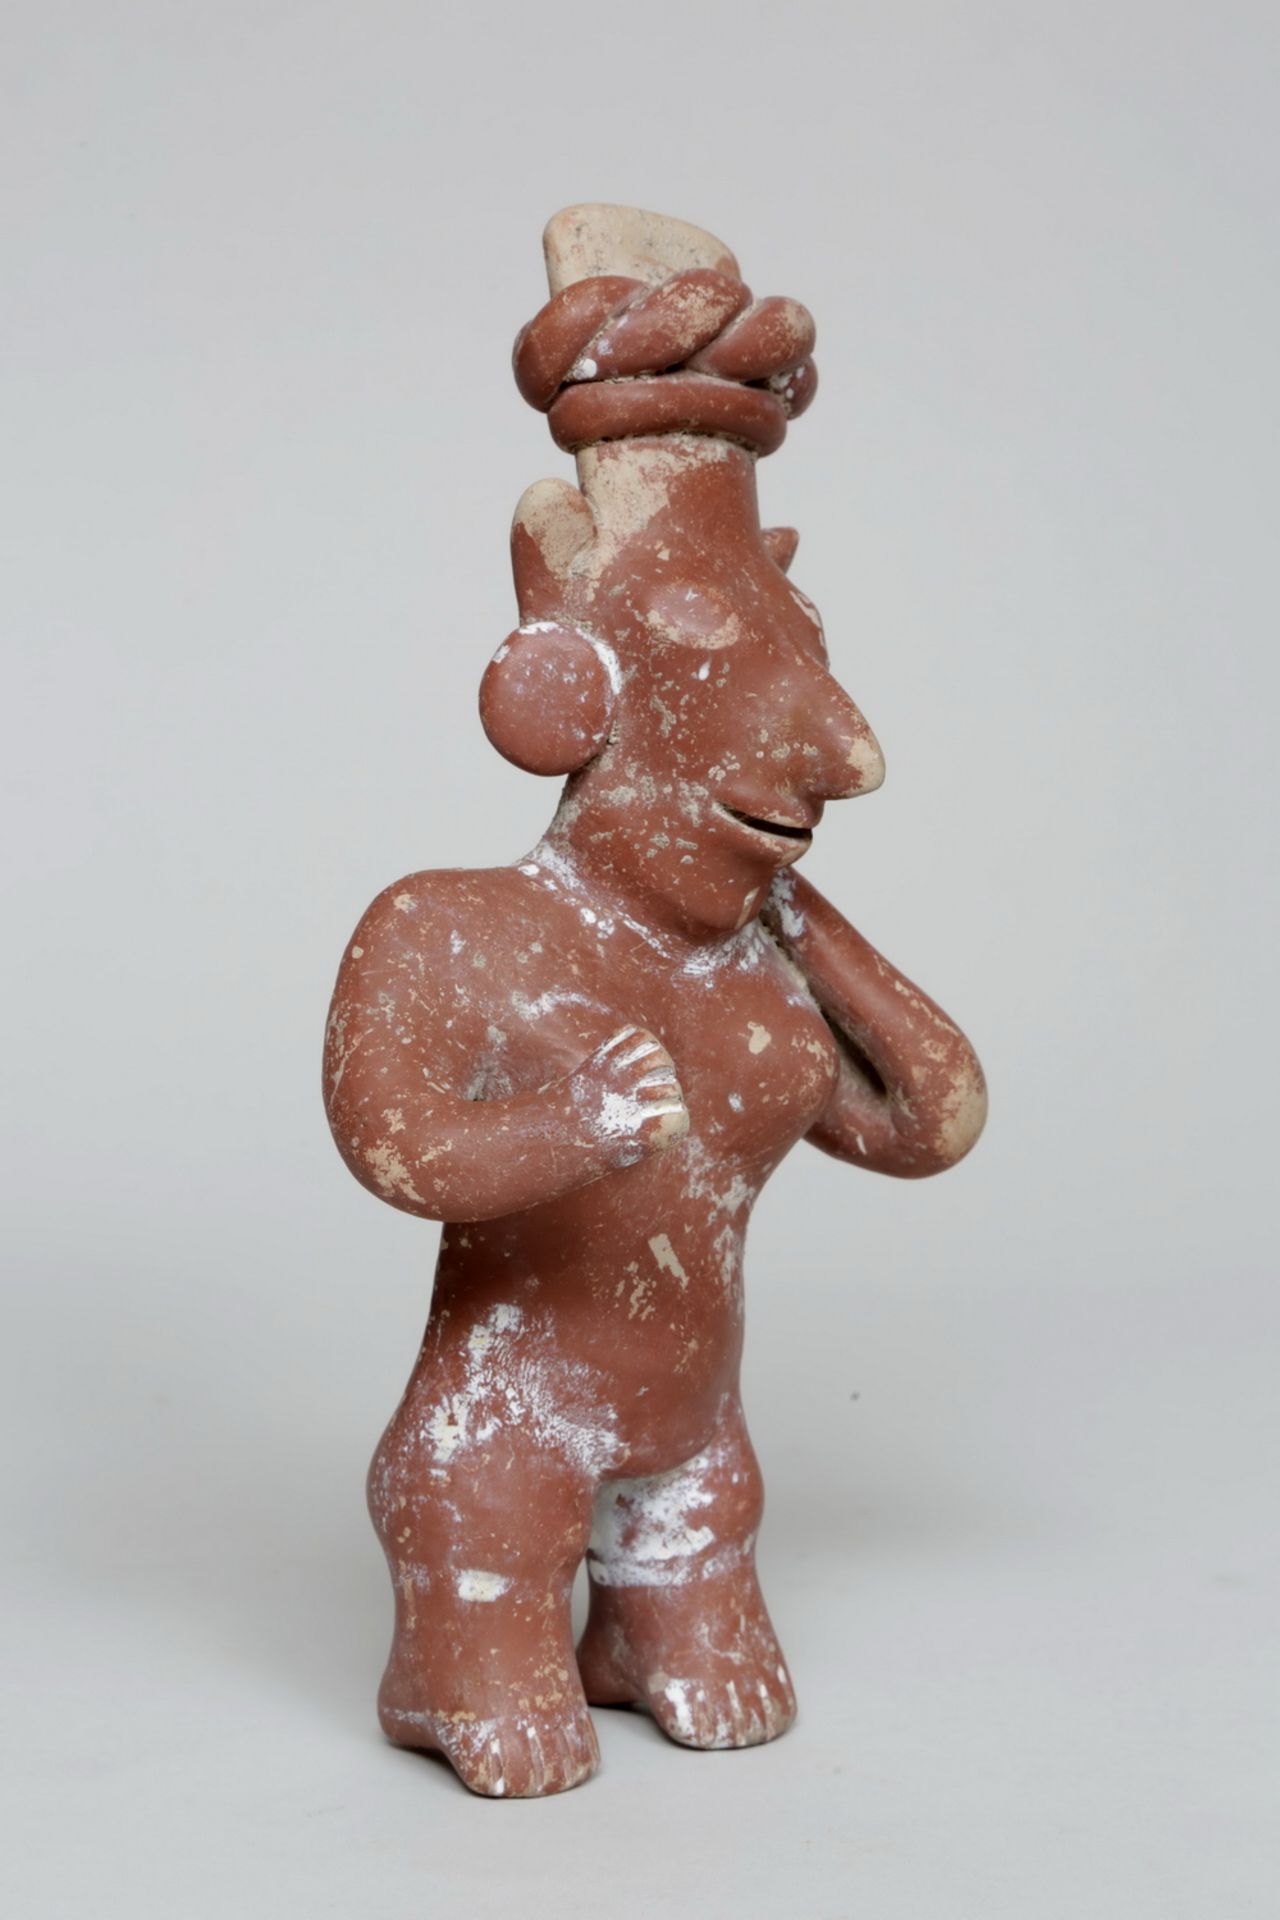 West Mexico, Jalisco, 3rd BC - 1st AD, standing female figure. - Image 2 of 4